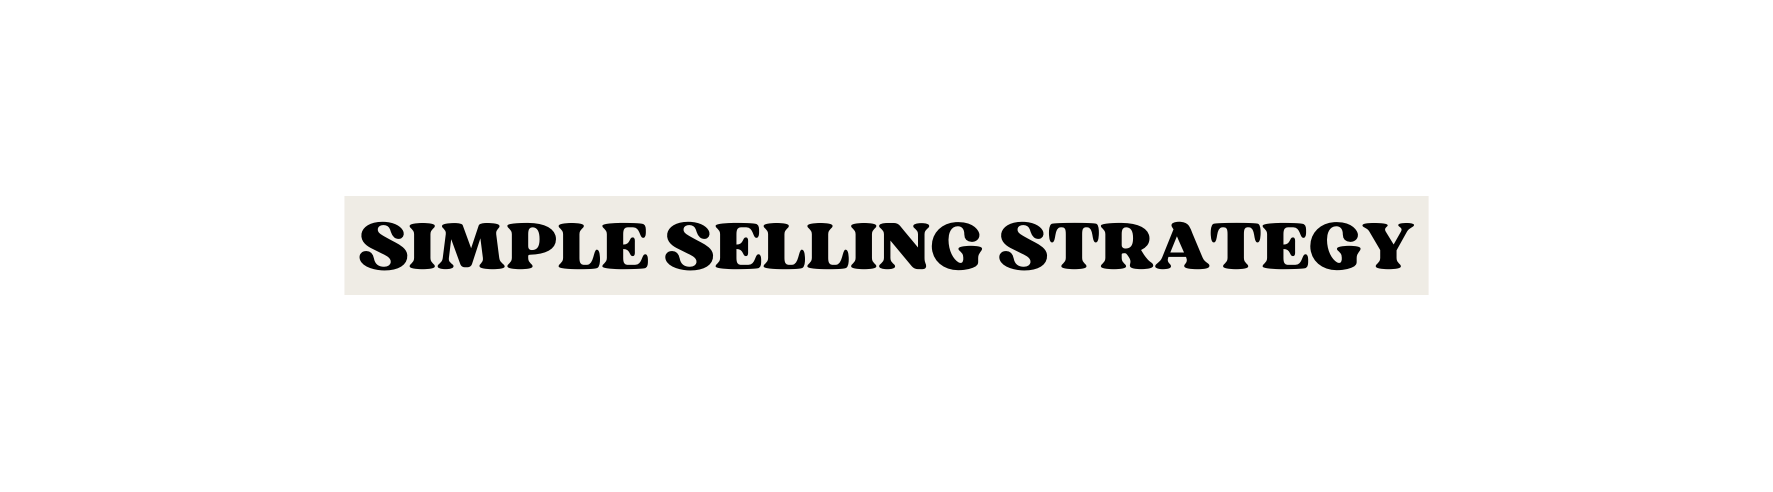 simple selling strategy